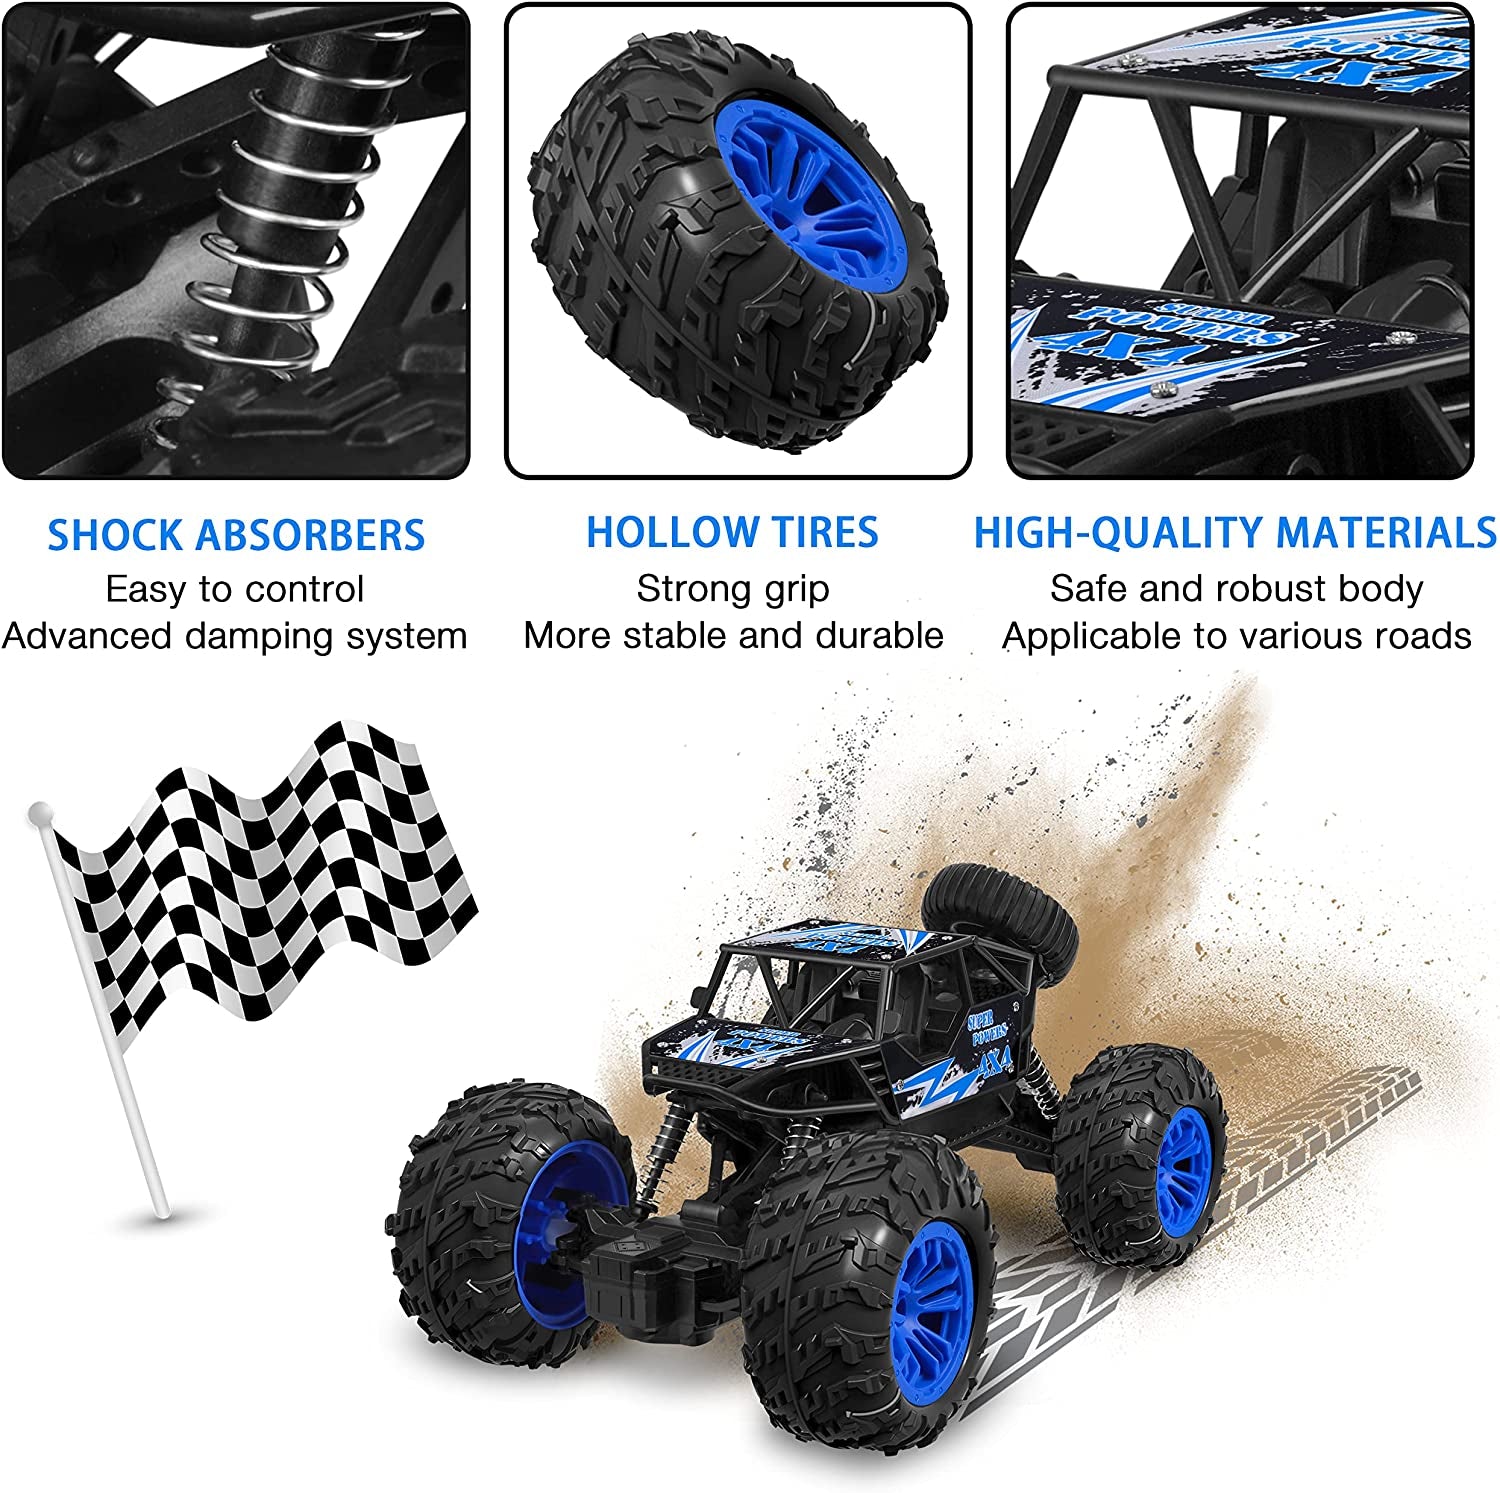 RC Car 1:18 Large Scale, 2.4Ghz All Terrain Waterproof Remote Control Truck with 2 Batteries,4X4 Electric Rapidly off Road Car For, Remote Control Car for Kids Boys and Adults